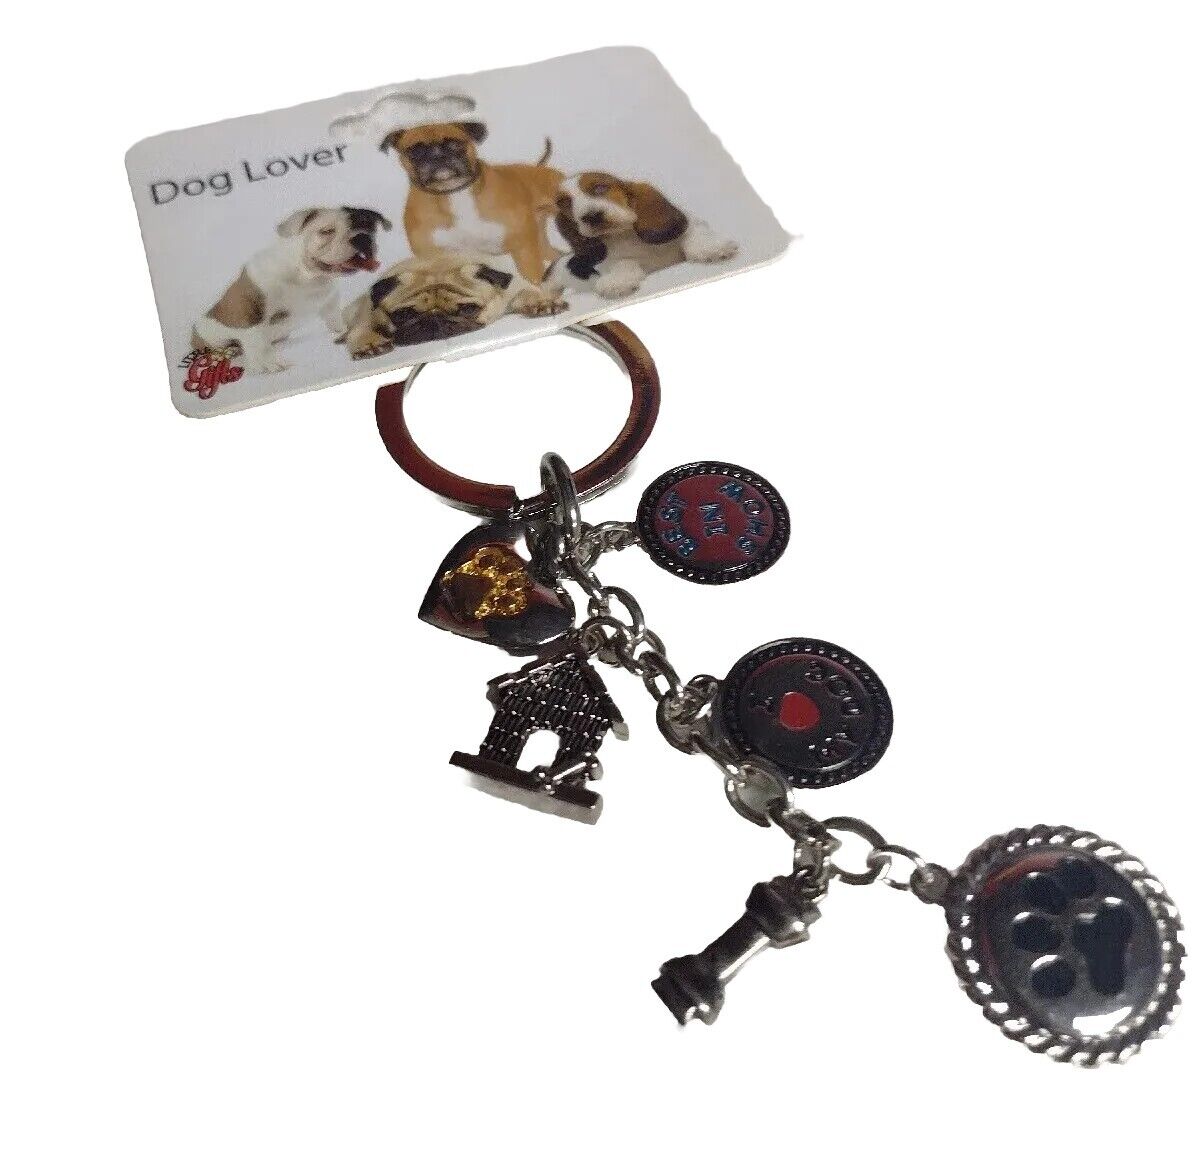 LITTLE GIFTS Dog Lover Keychain  Silver Color Stainless  Steel.